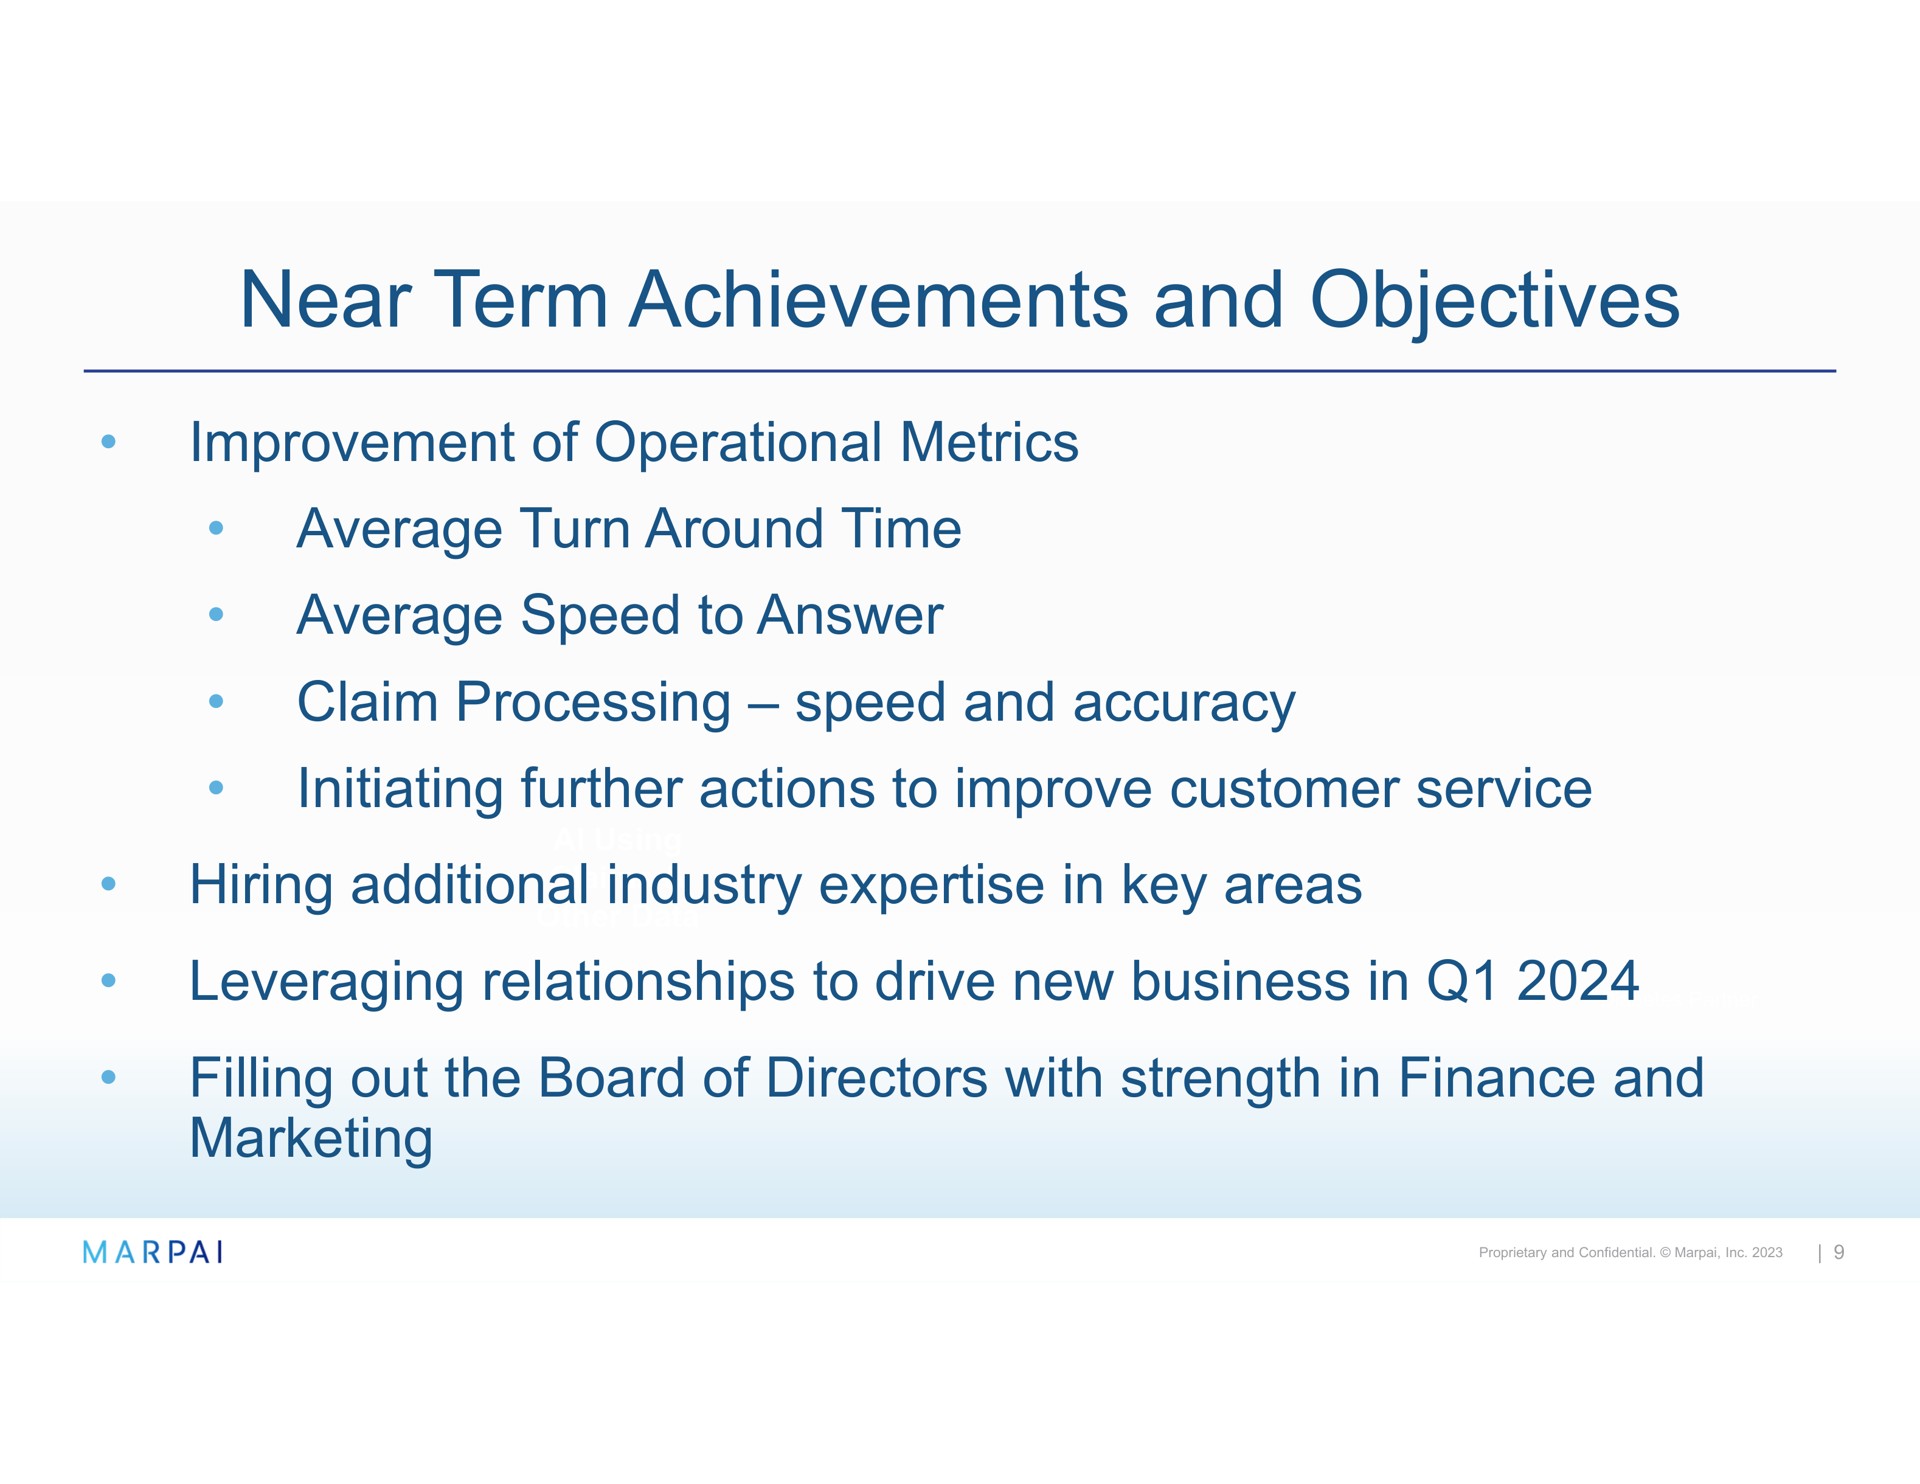 near term achievements and objectives improvement of operational metrics average turn around time average speed to answer claim processing speed accuracy initiating further actions to improve customer service hiring additional industry in key areas leveraging relationships to drive new business in filling out the board of directors with strength in finance marketing | Marpai